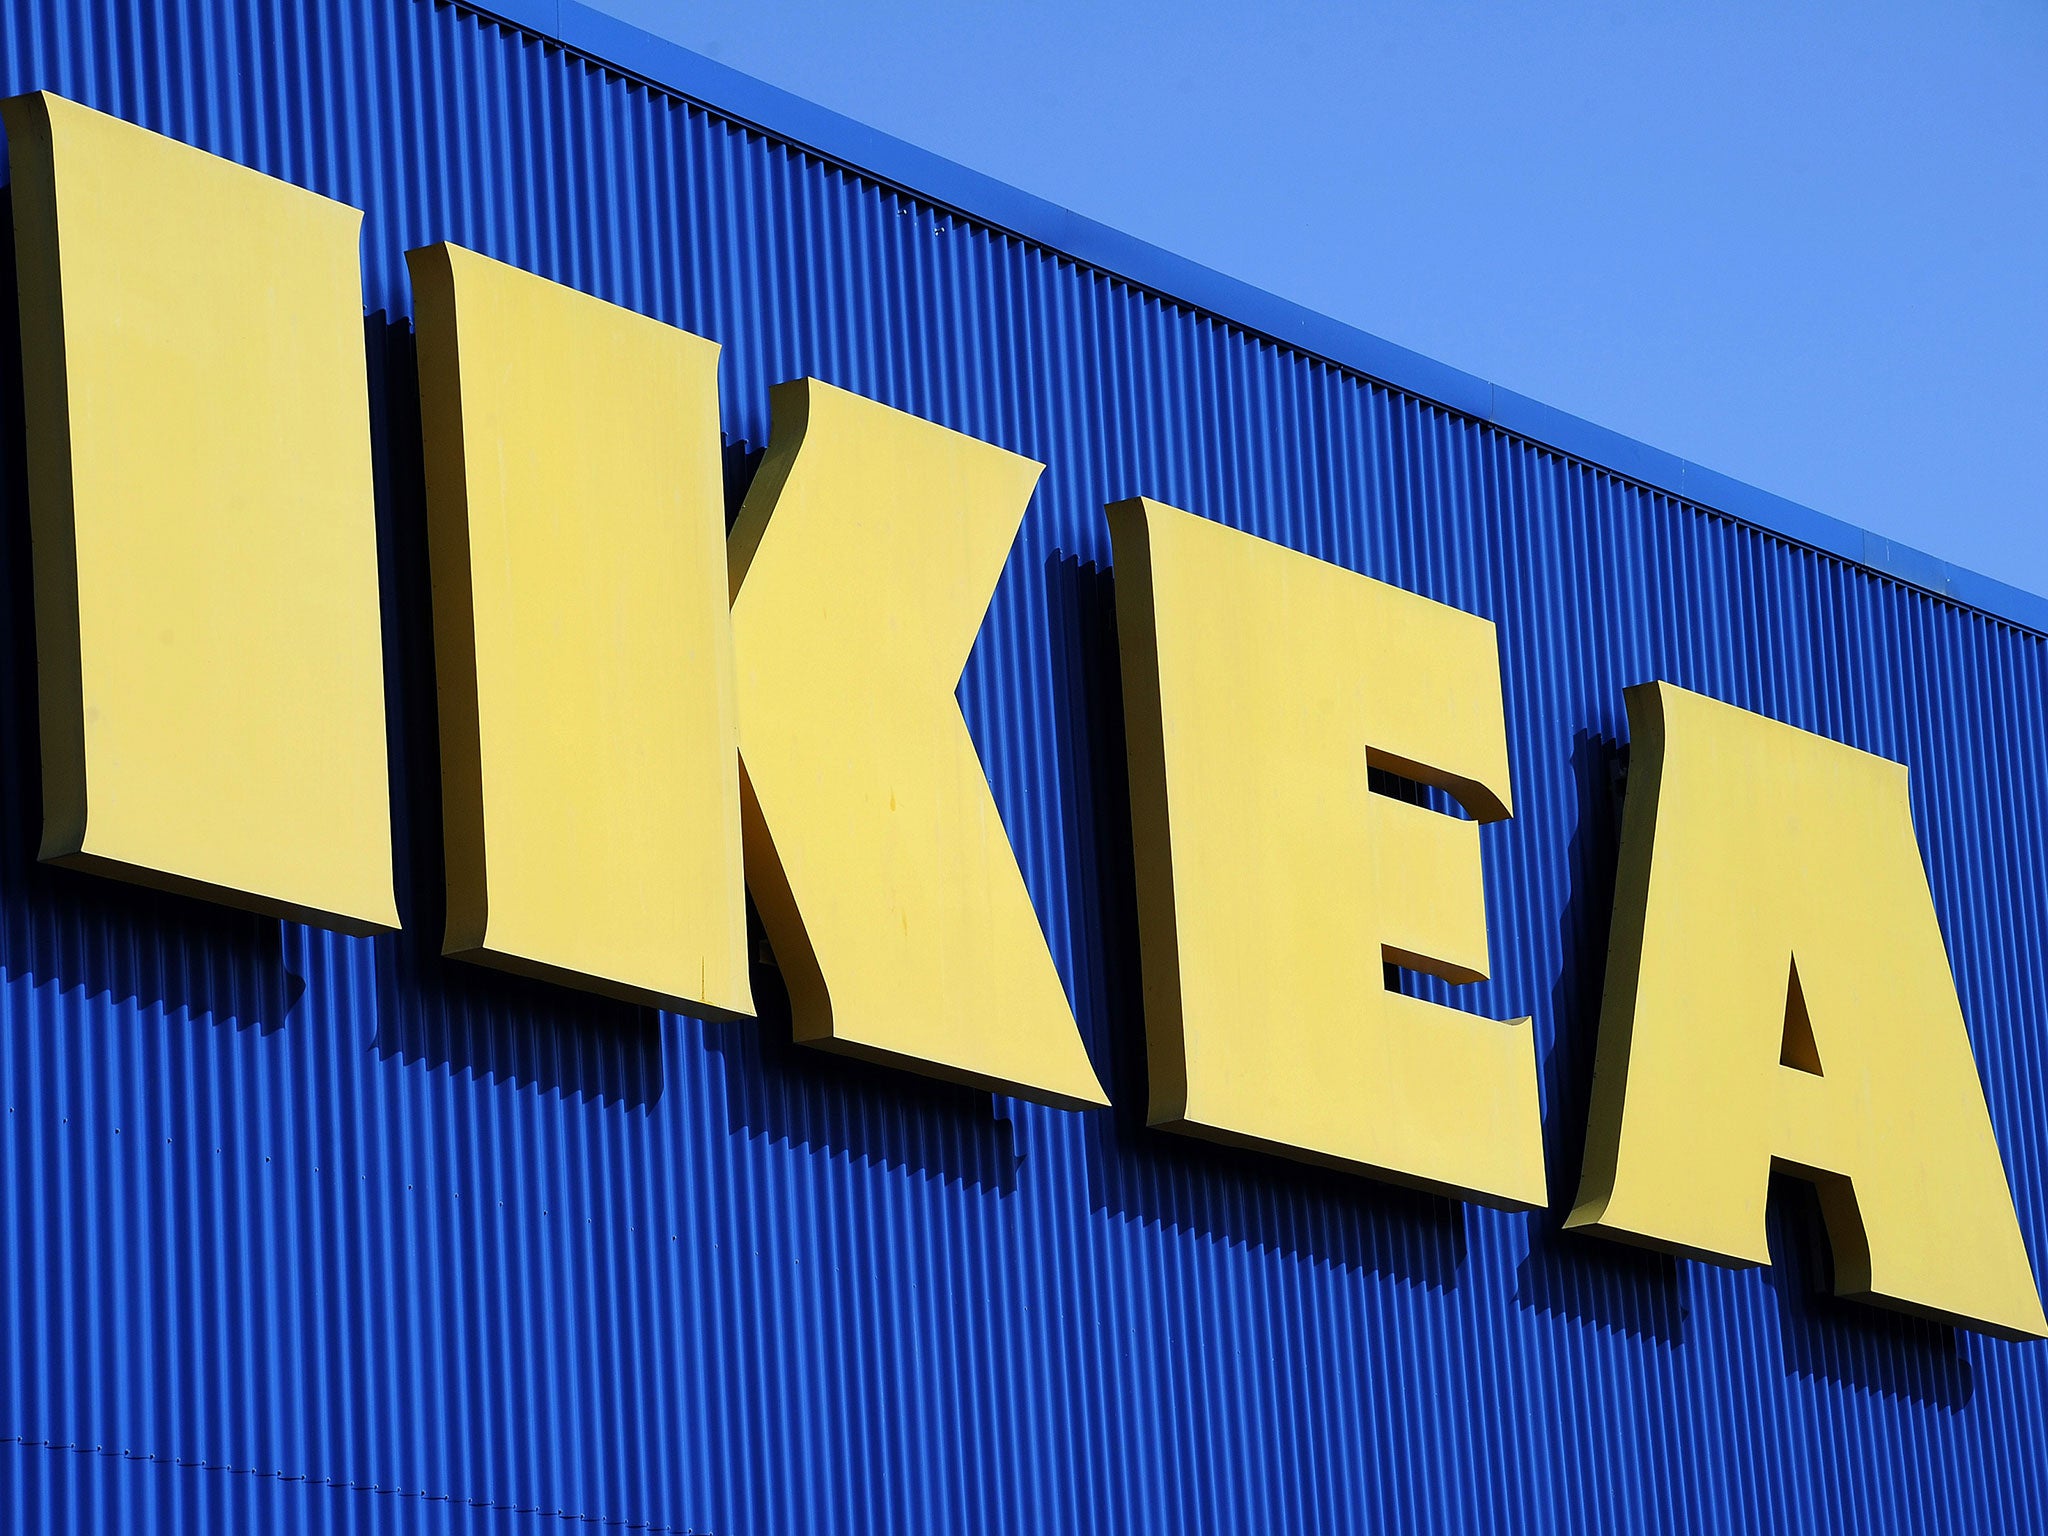 Two people have been killed and one left with life-threatening injuries at an Ikea store near Stockholm